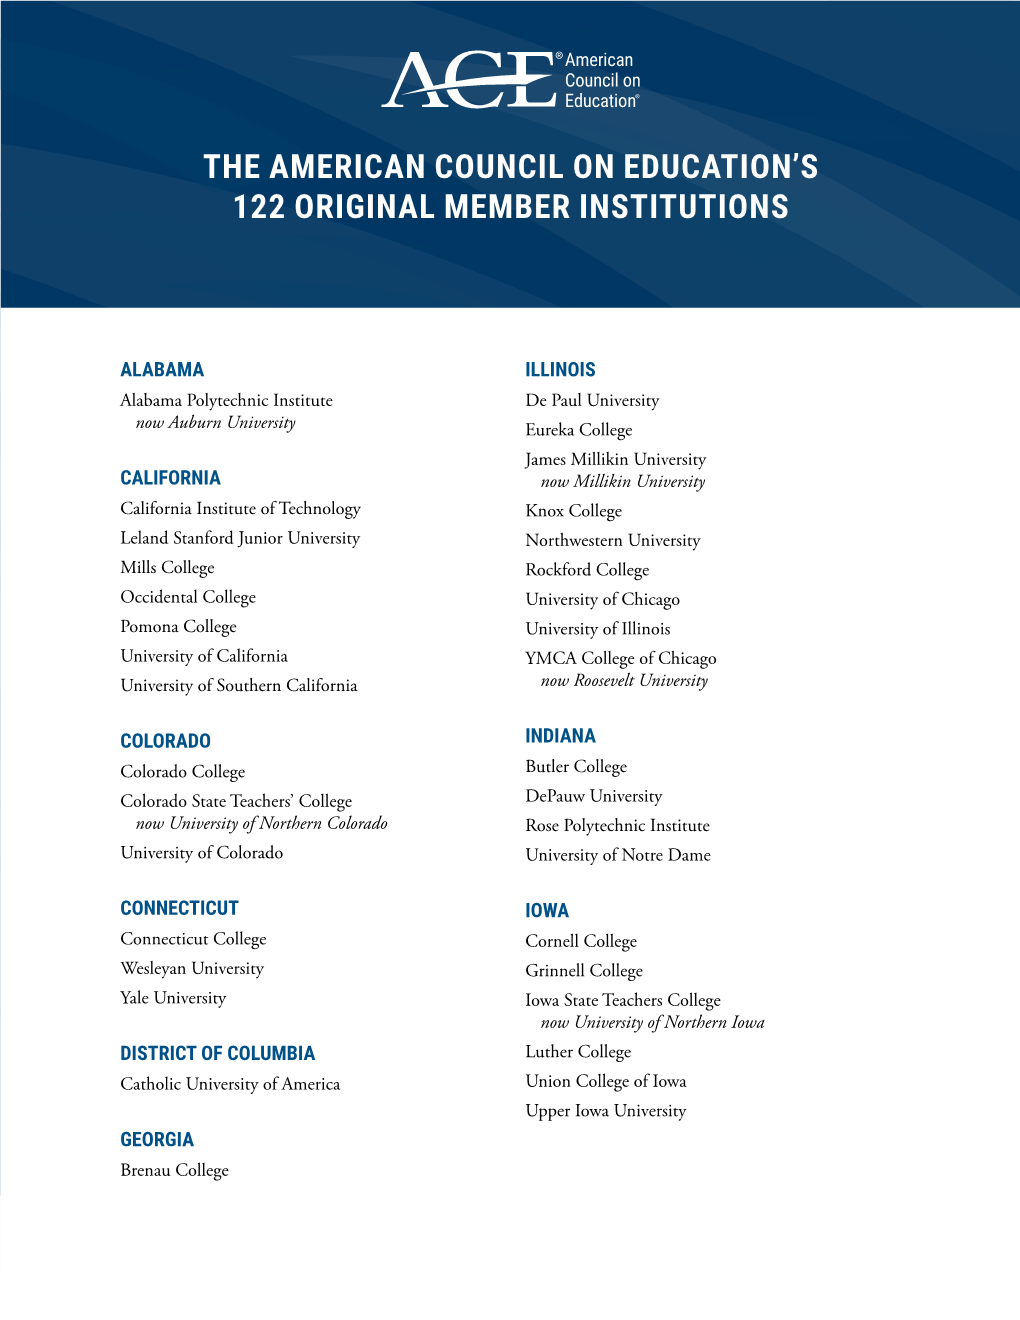 The American Council on Education's 122 Original Member Institutions